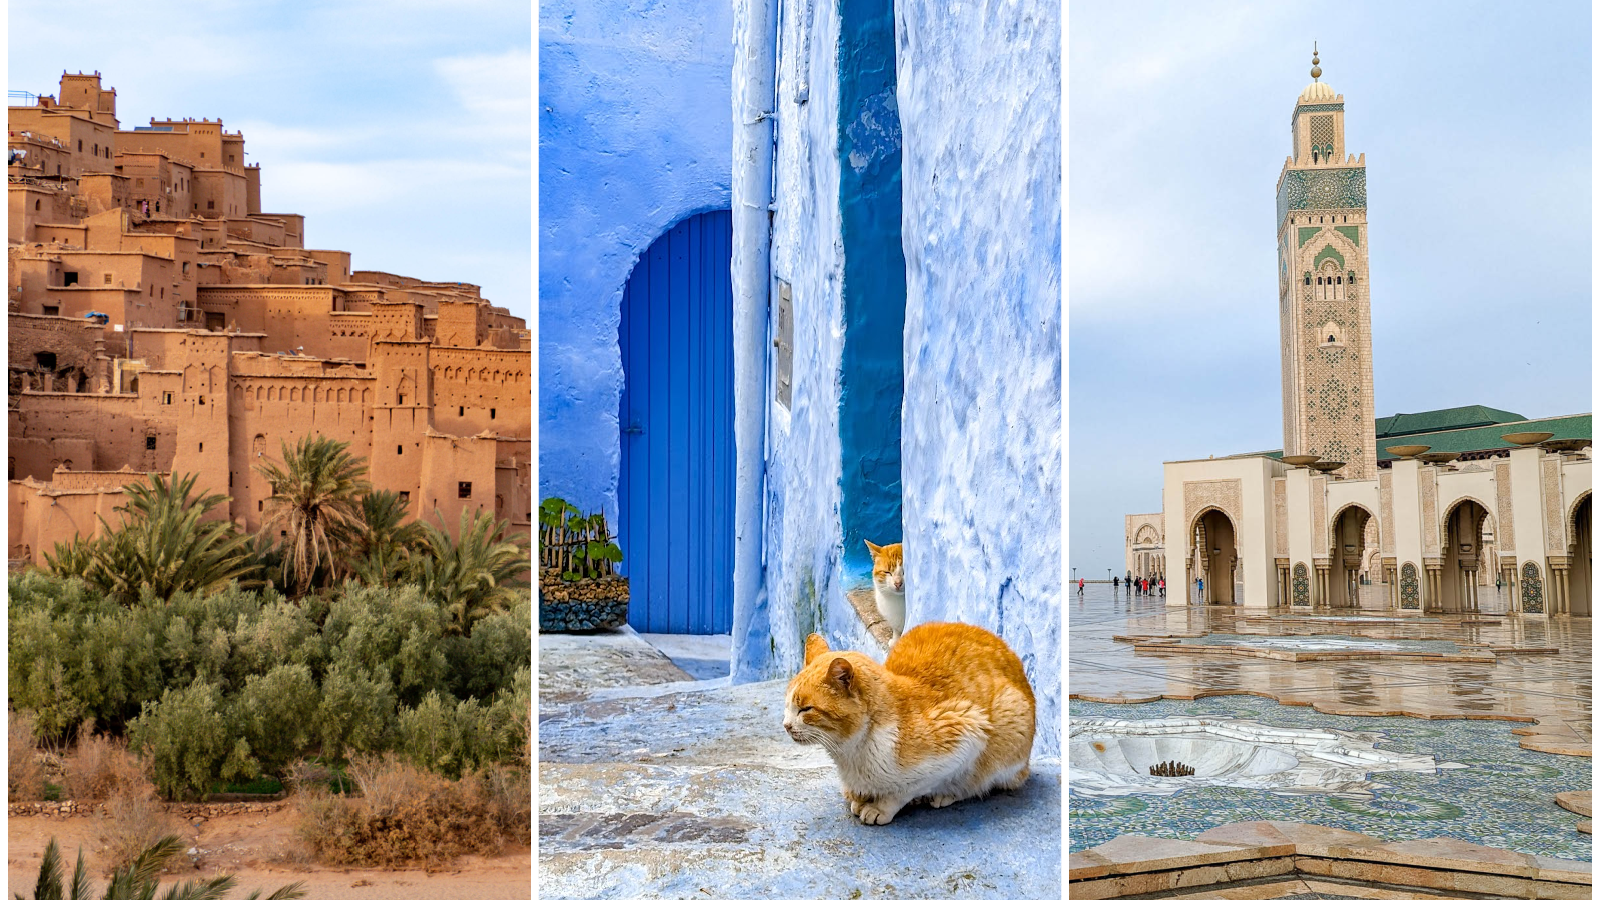 three images: an ancient kasbah, an orange cat sitting in front of a blue door, and a tan and green mosque on an overcast day